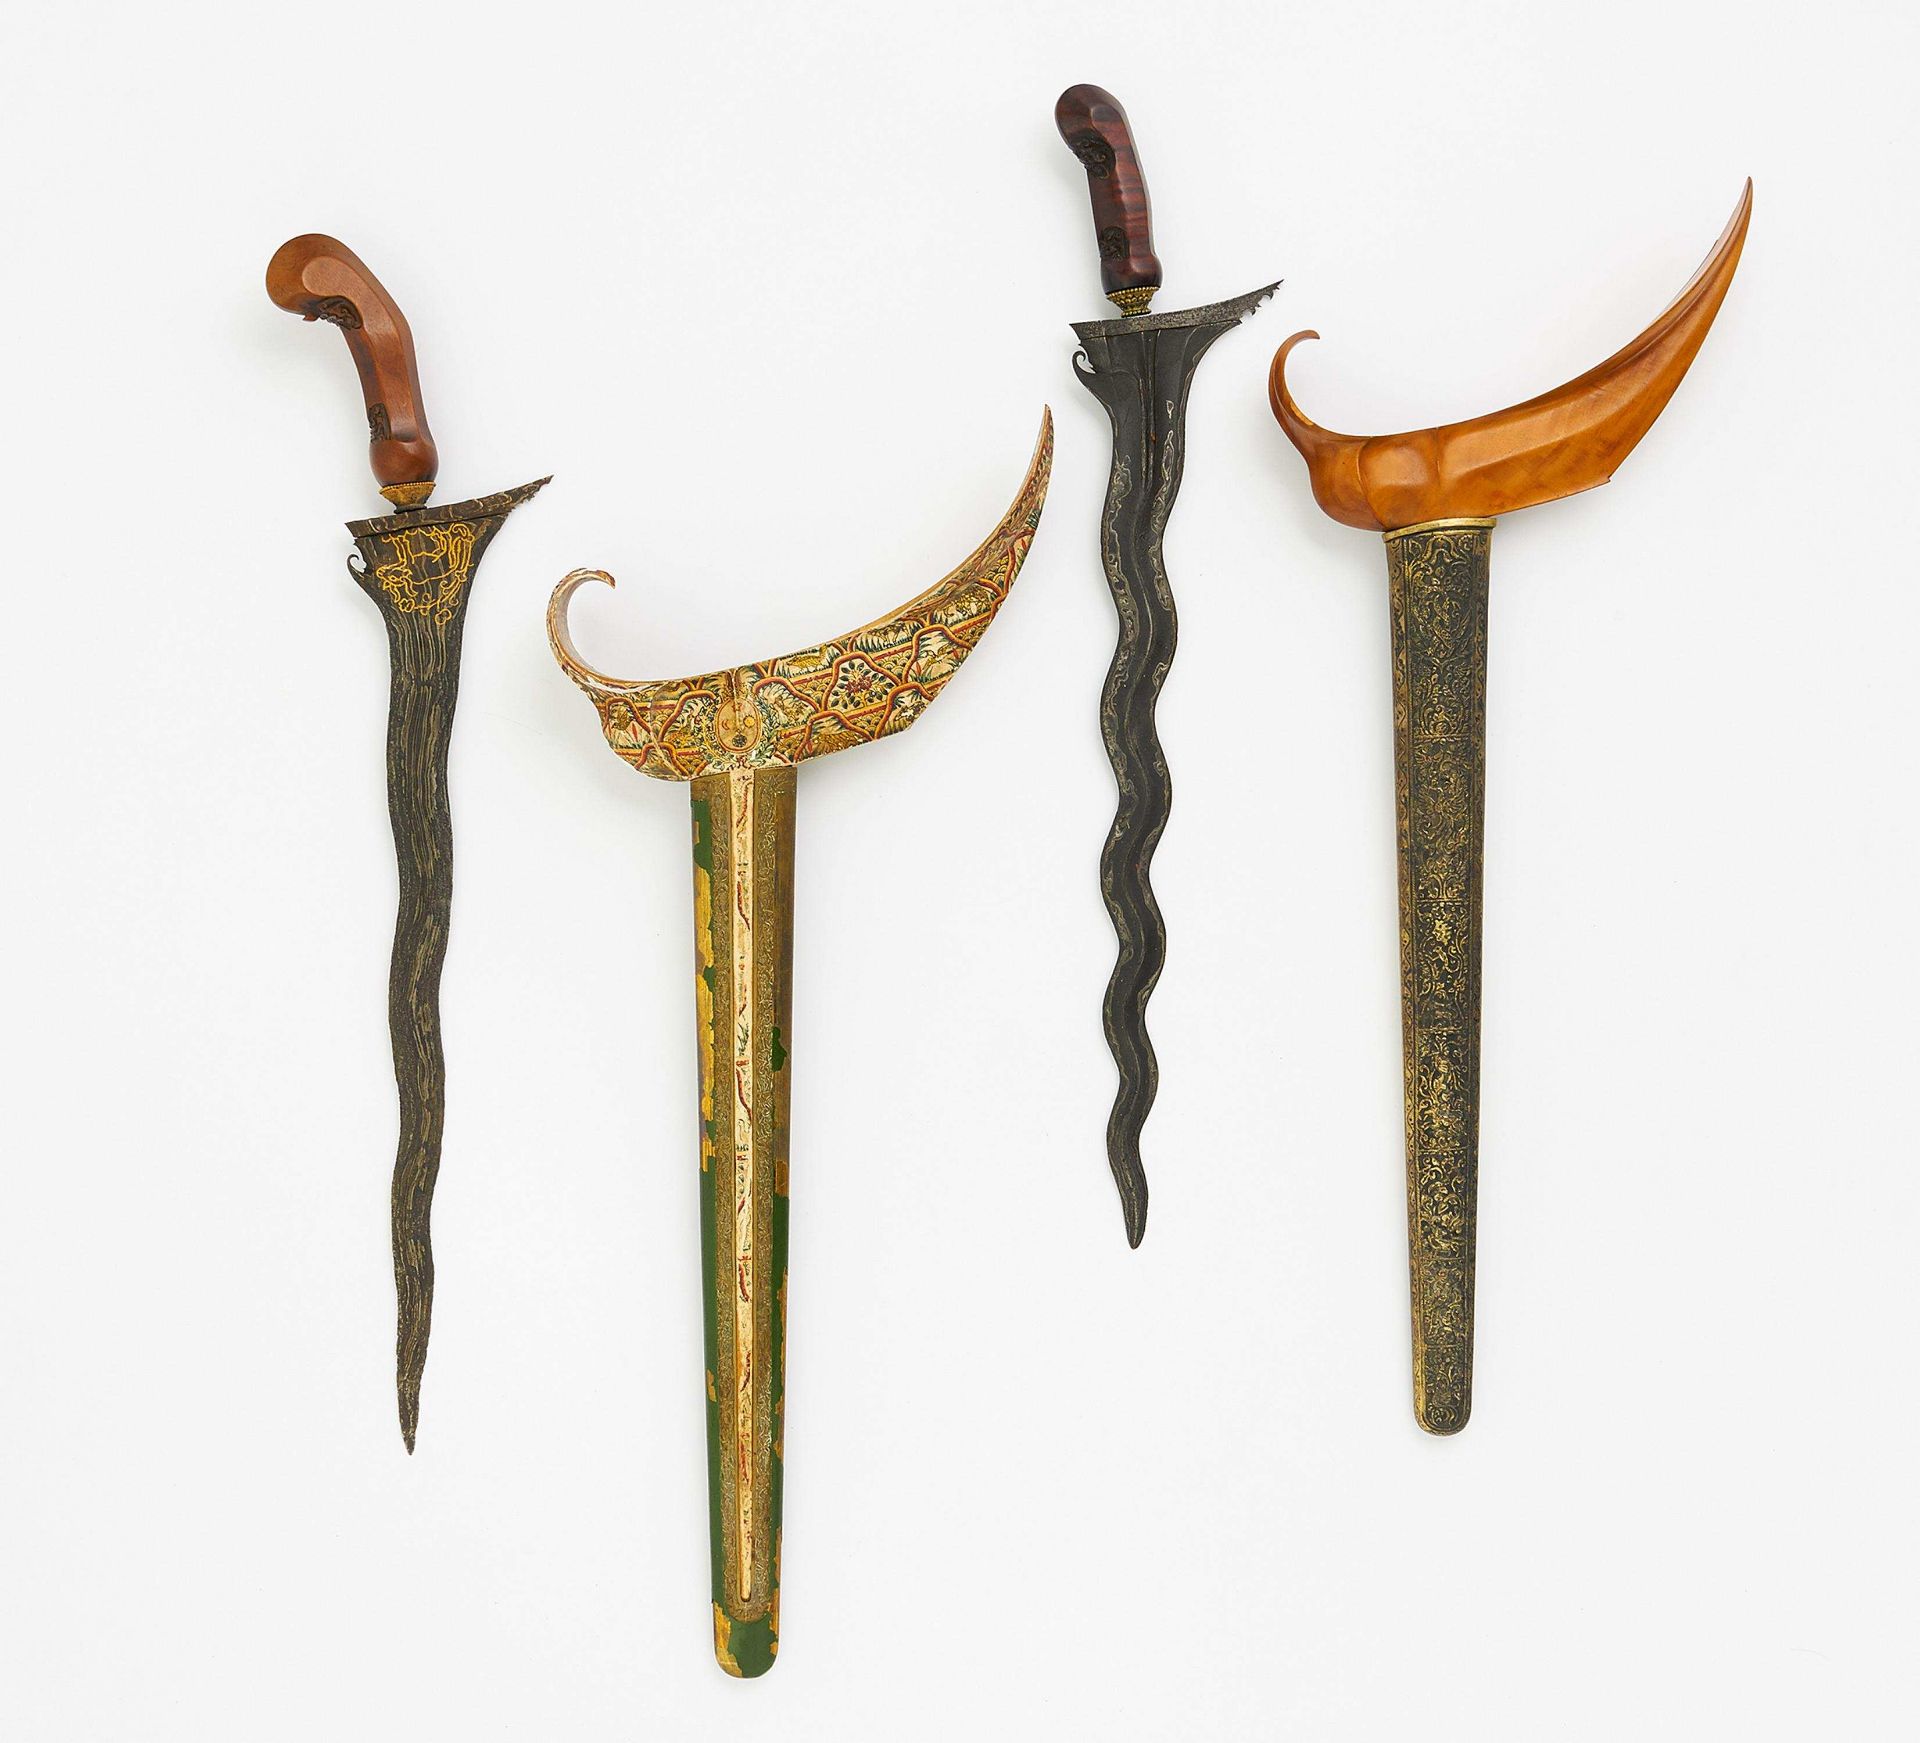 TWO KERIS WITH LADRANG SHEATS. Indonesia. Forged. A) Surakarta with gold painting of a Nandi on